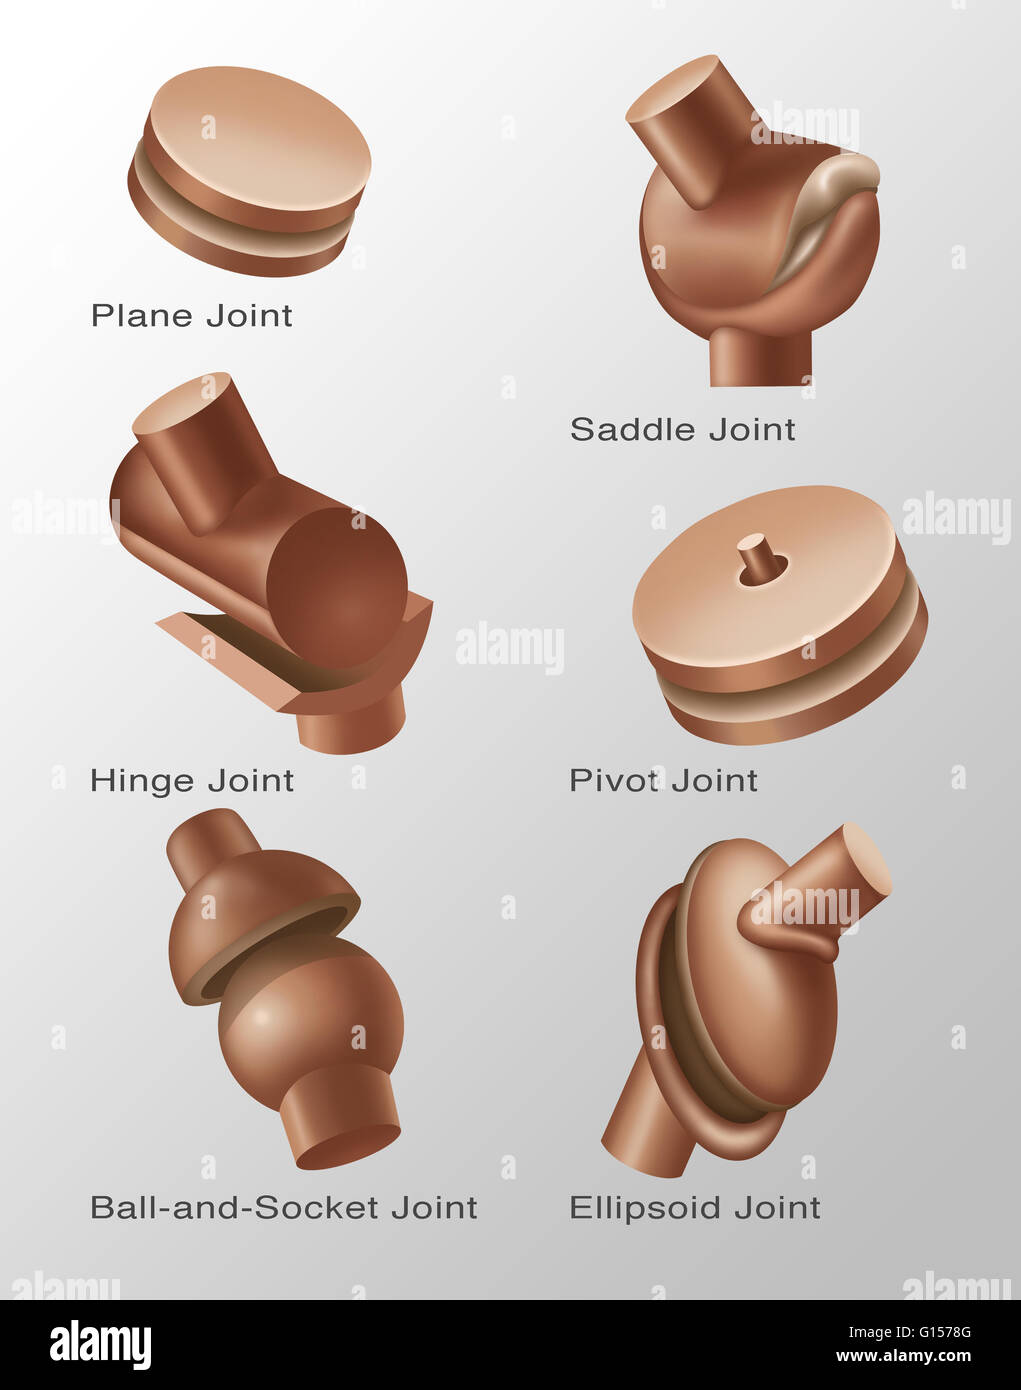 Illustration of joint replacements. Stock Photo